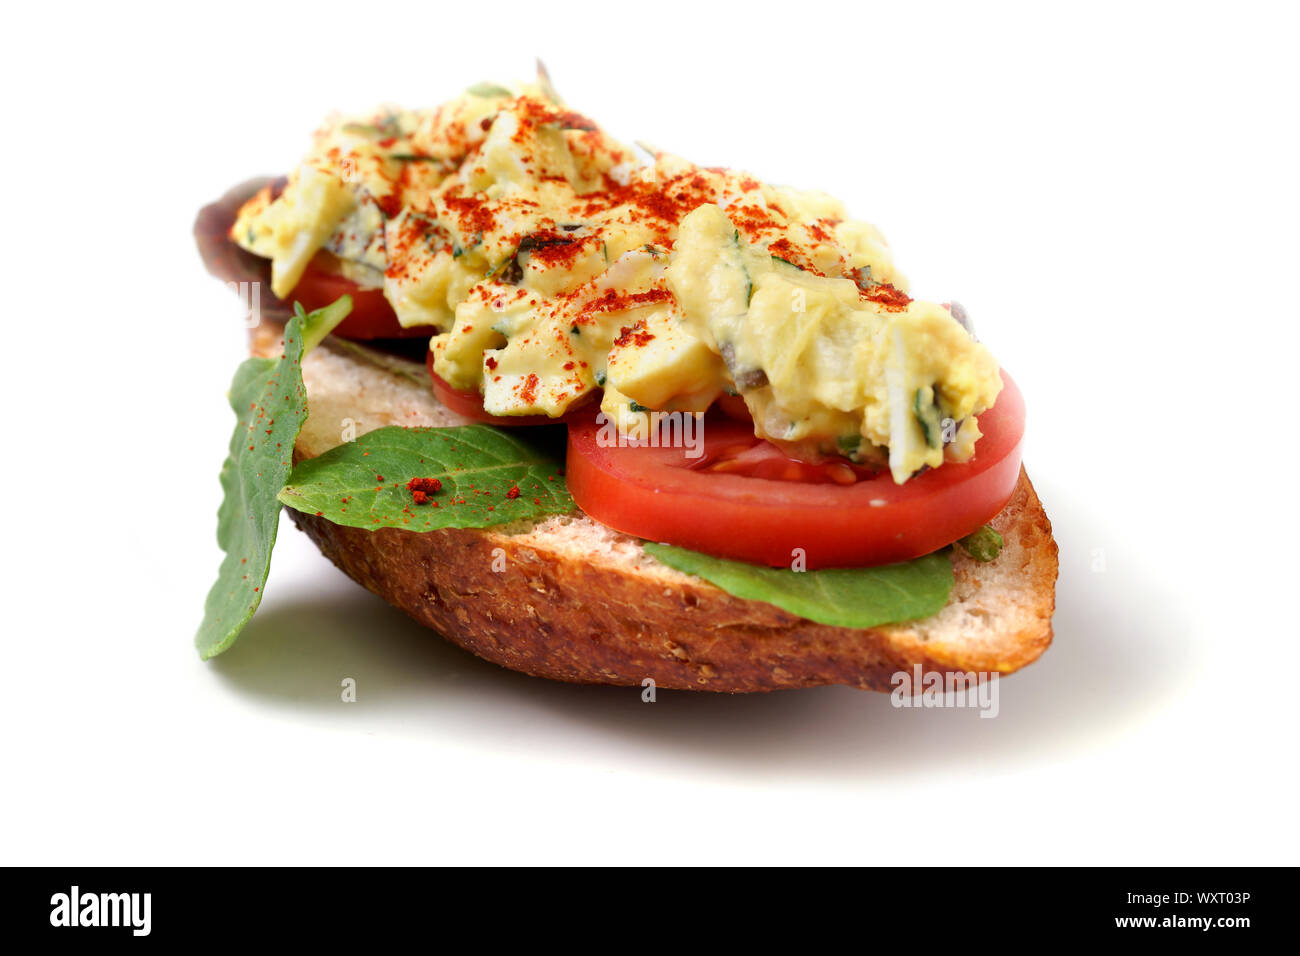 Close-up photograph of delicious open face egg salad sandwiches with tomato and lettuce. Stock Photo